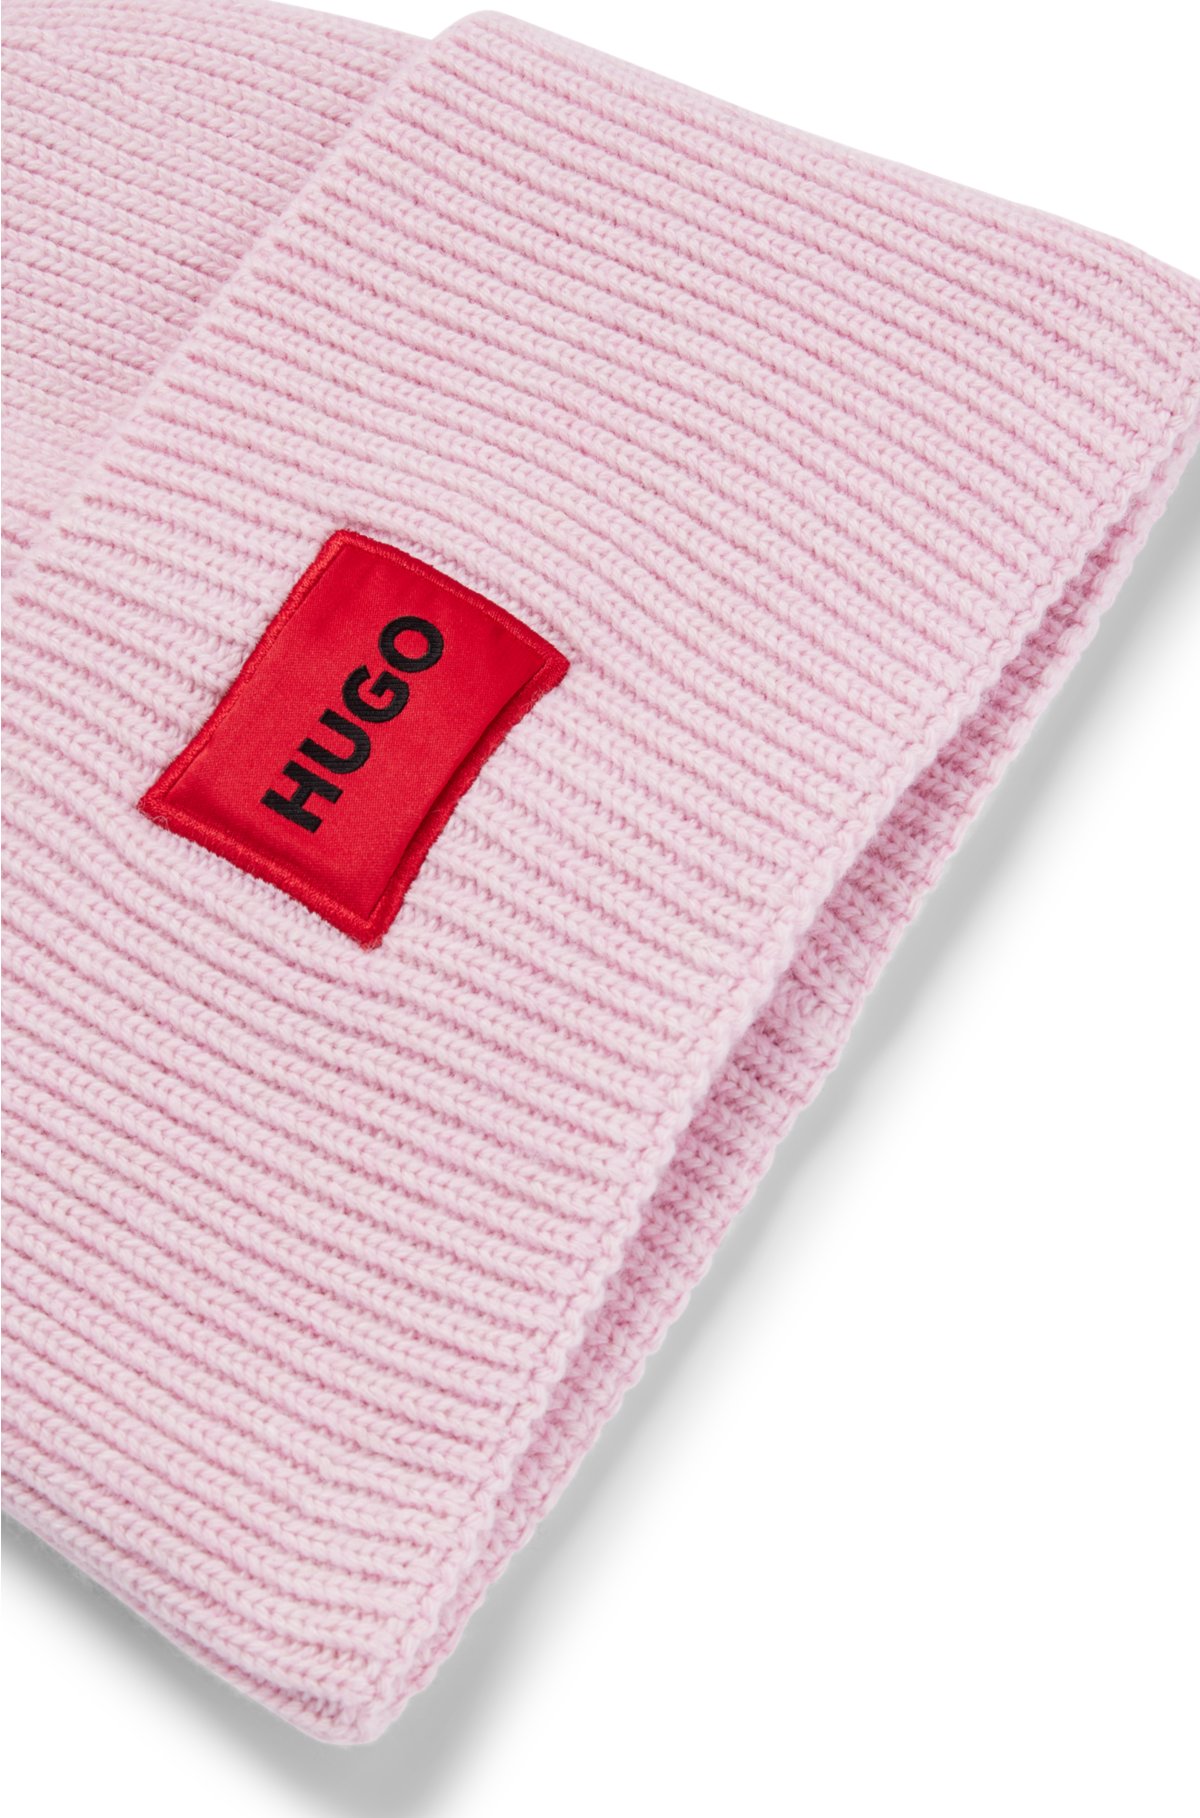 Wool-blend beanie - HUGO label hat red logo with